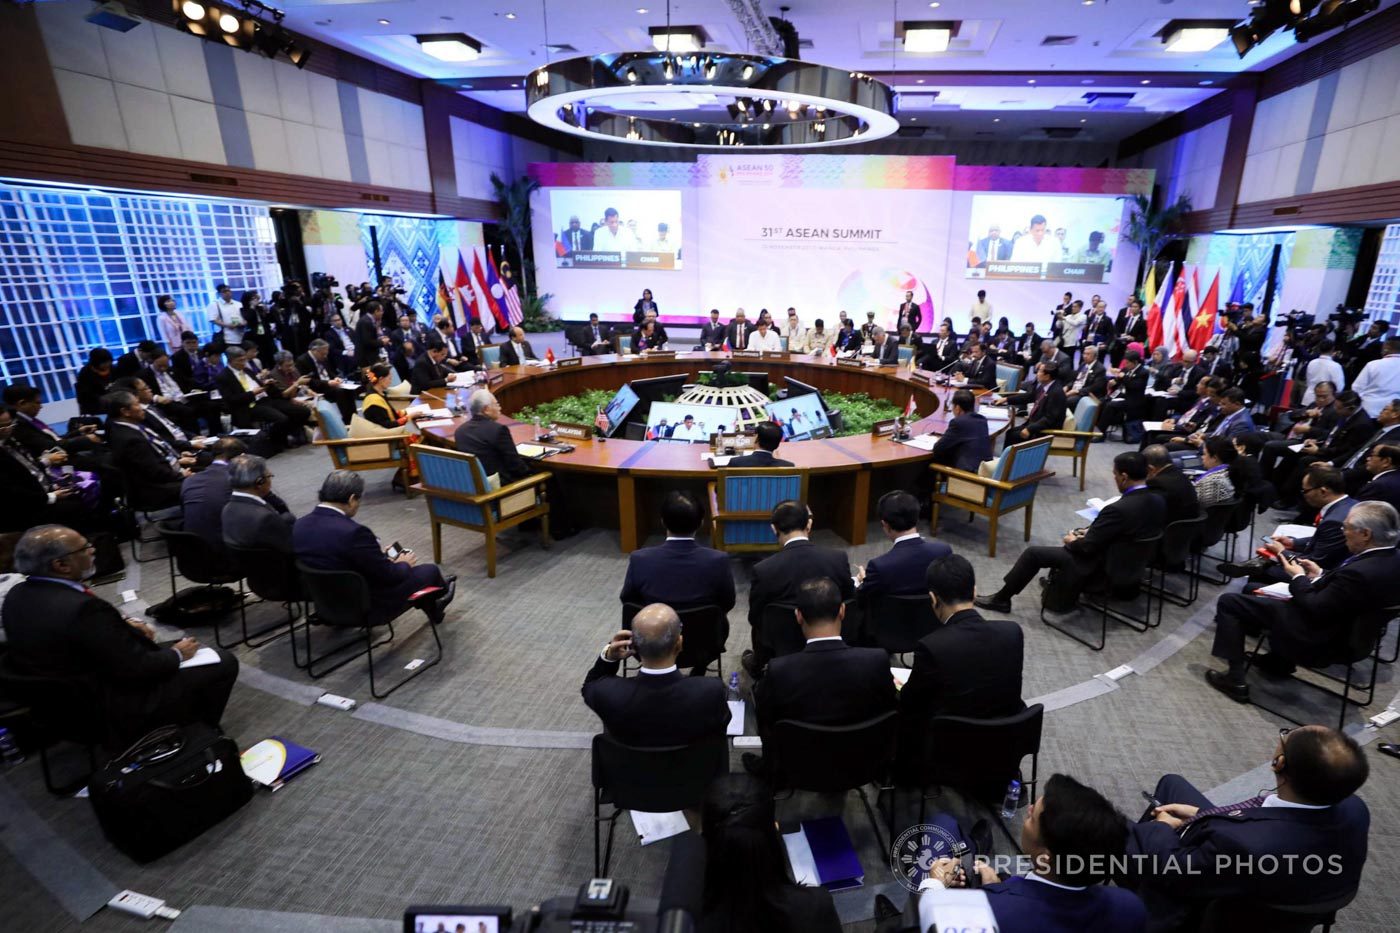 A region in panic: ASEAN doubles down against ISIS threat